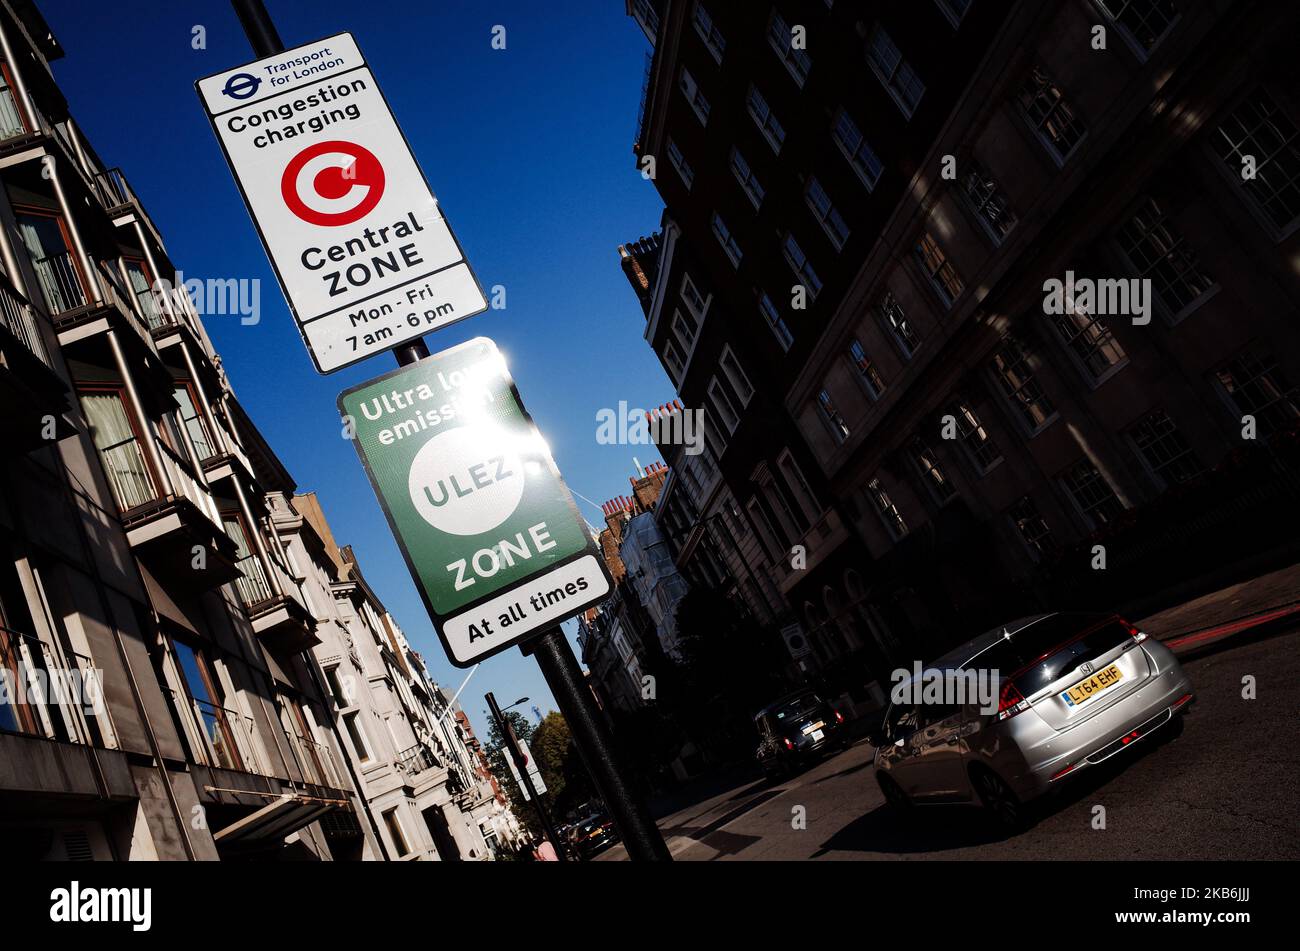 A Honda Prius hybrid car drives past signs for the central London Congestion Charging Zone (CCZ) and Ultra Low Emission Zone (ULEZ) on Upper Brook Street in London, England, on September 21, 2019. (Photo by David Cliff/NurPhoto) Stock Photo